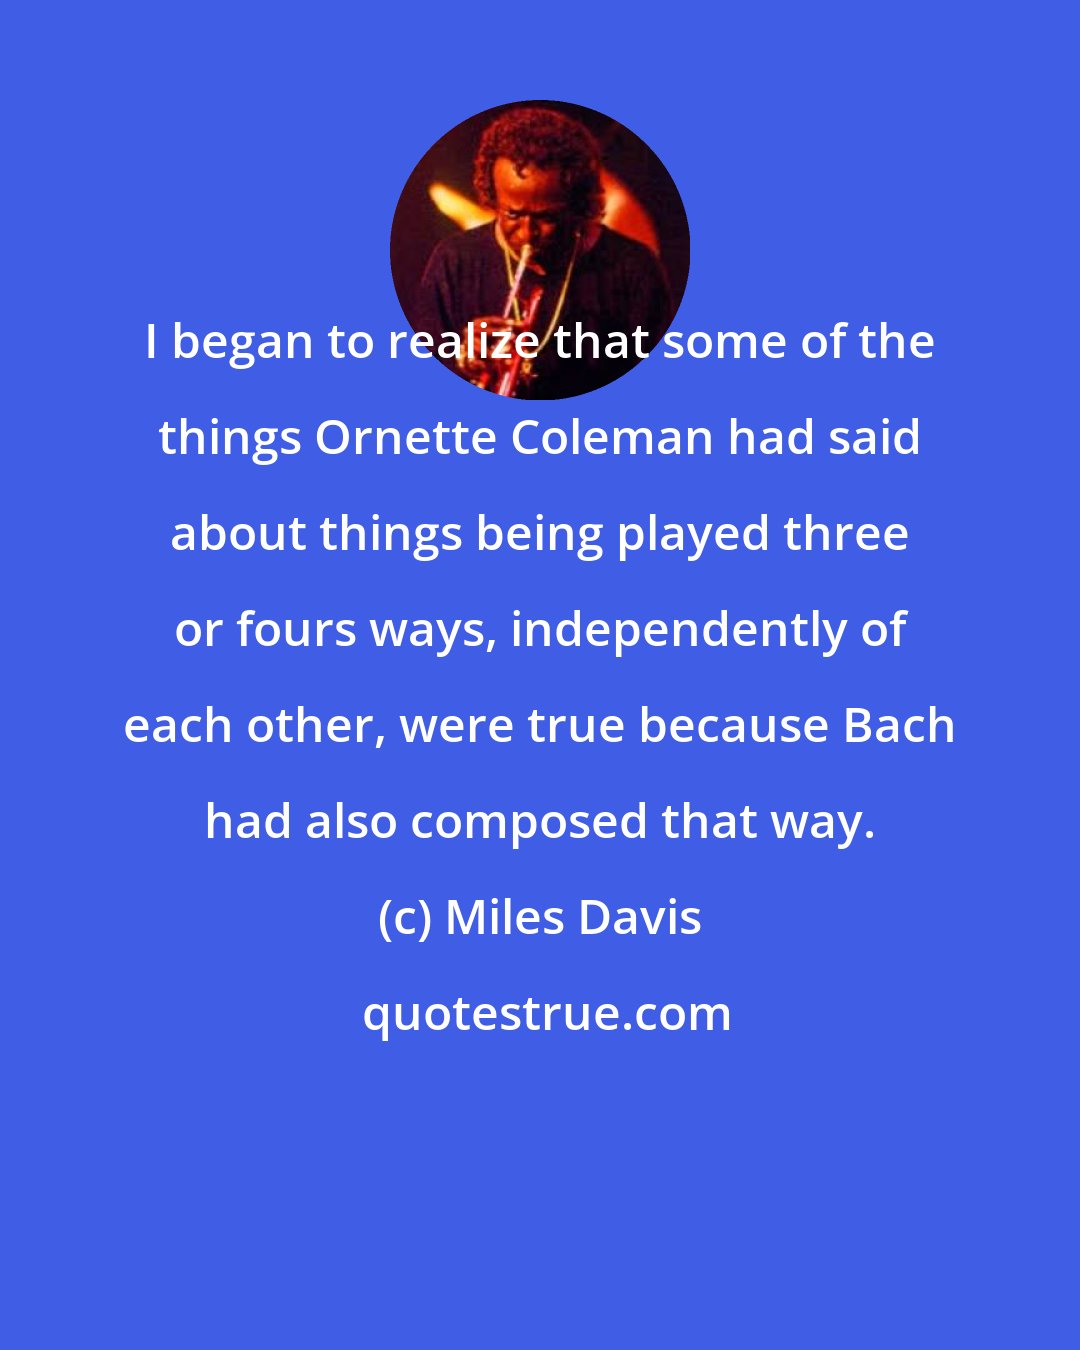 Miles Davis: I began to realize that some of the things Ornette Coleman had said about things being played three or fours ways, independently of each other, were true because Bach had also composed that way.